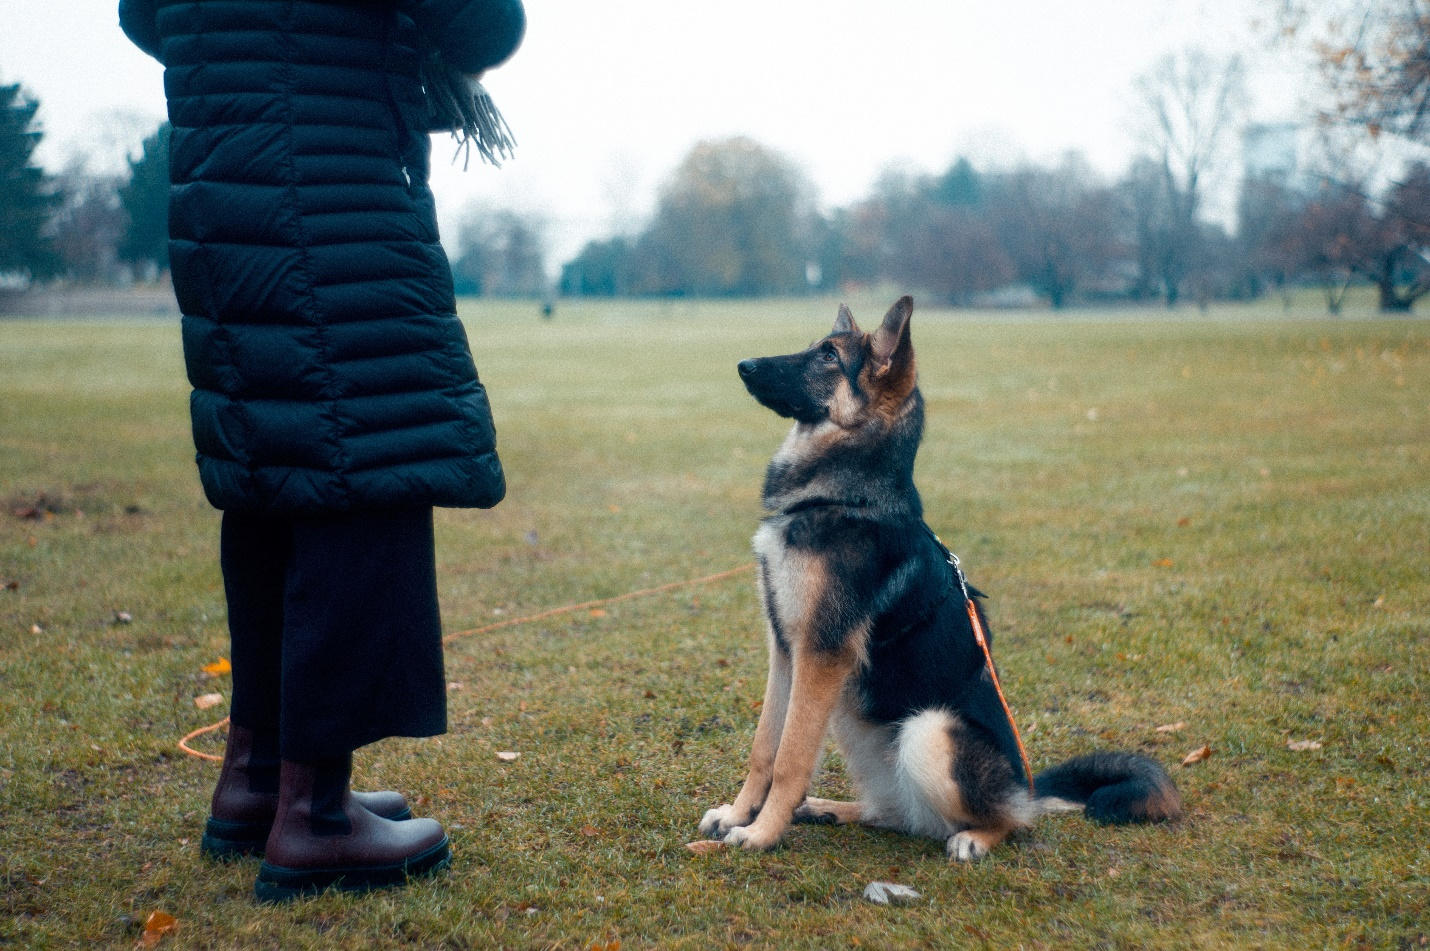 Train your dog to get them to behave appropriately in public and indoors. Read more to find out what the seven basic dog commands are.